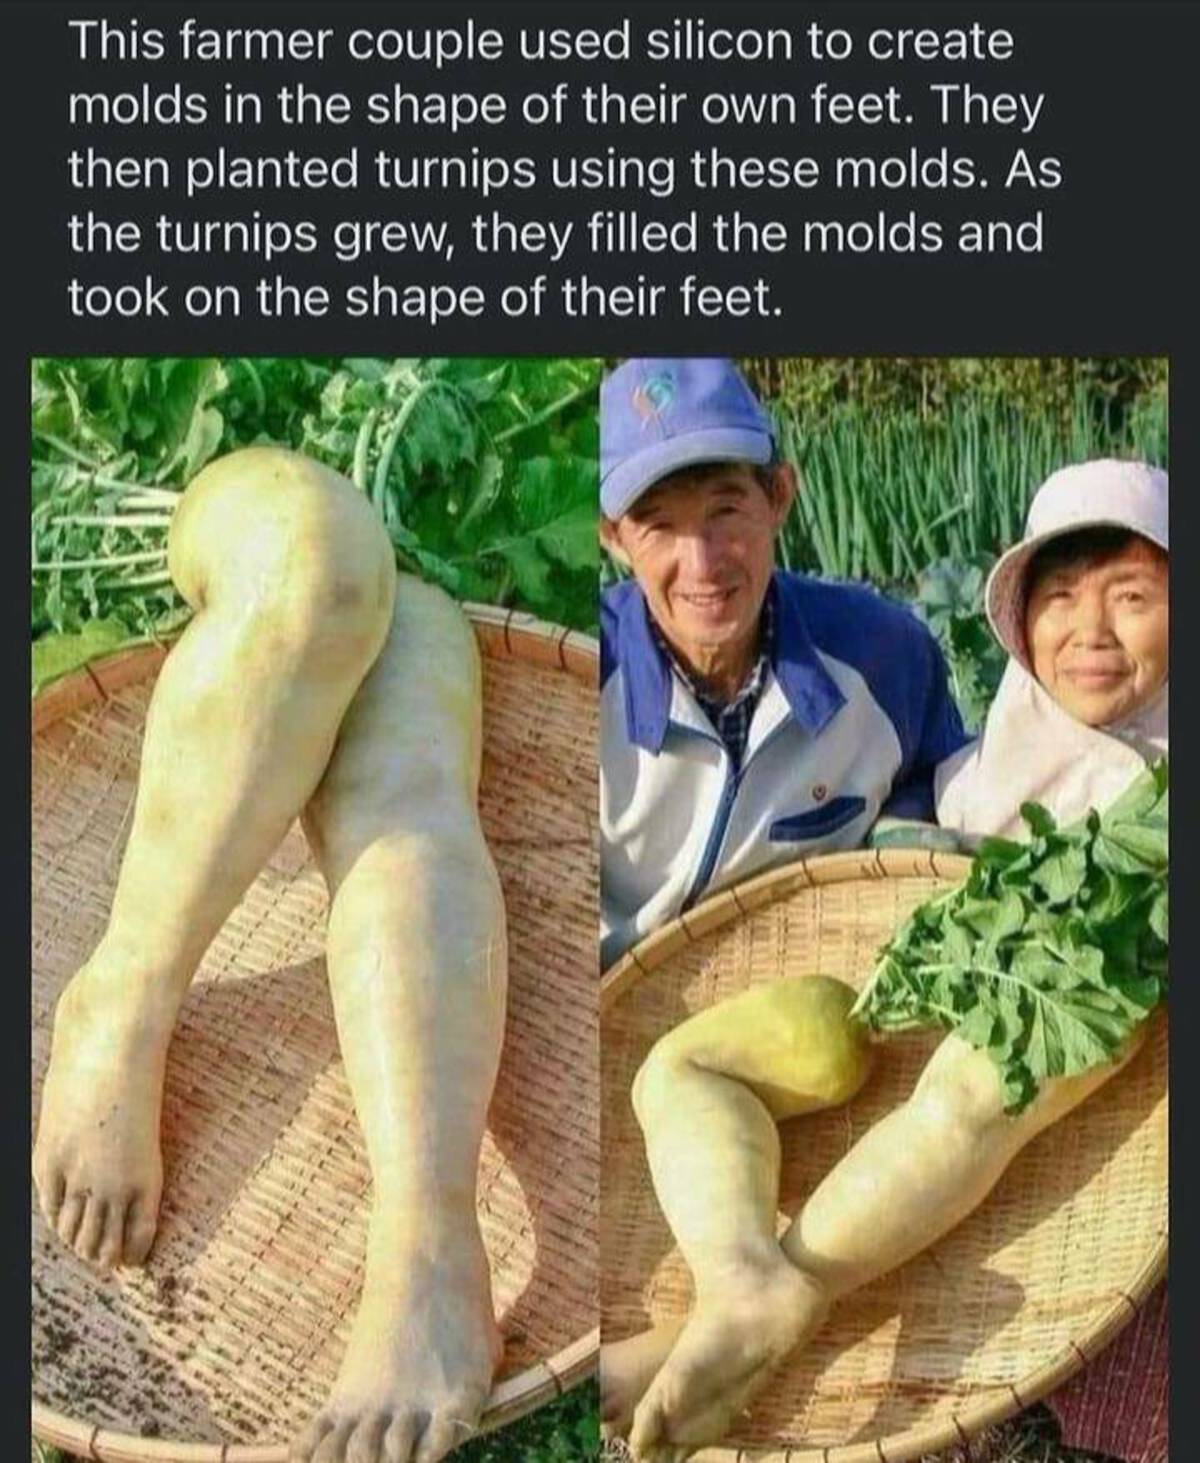 foot turnip - This farmer couple used silicon to create molds in the shape of their own feet. They then planted turnips using these molds. As the turnips grew, they filled the molds and took on the shape of their feet.